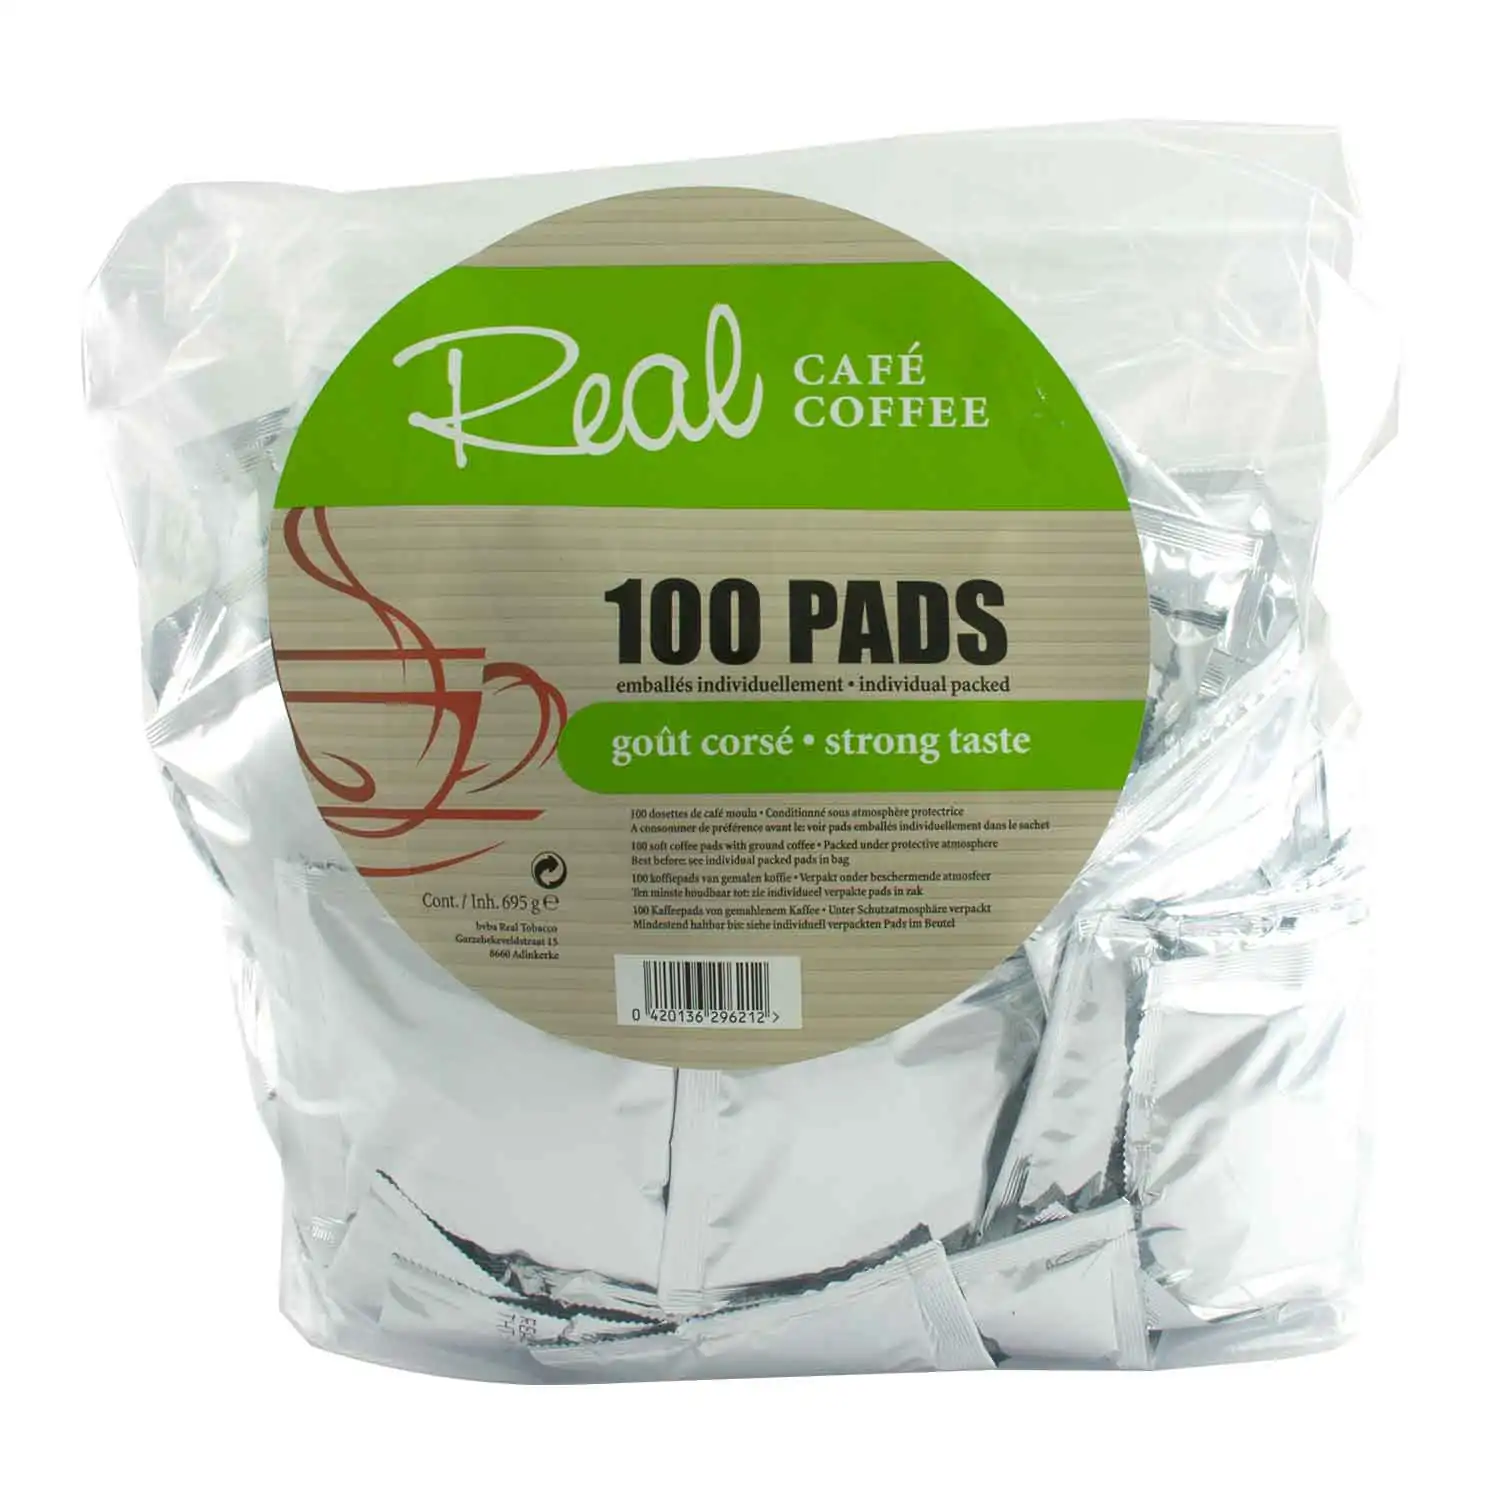 Real coffee strong 100 pads